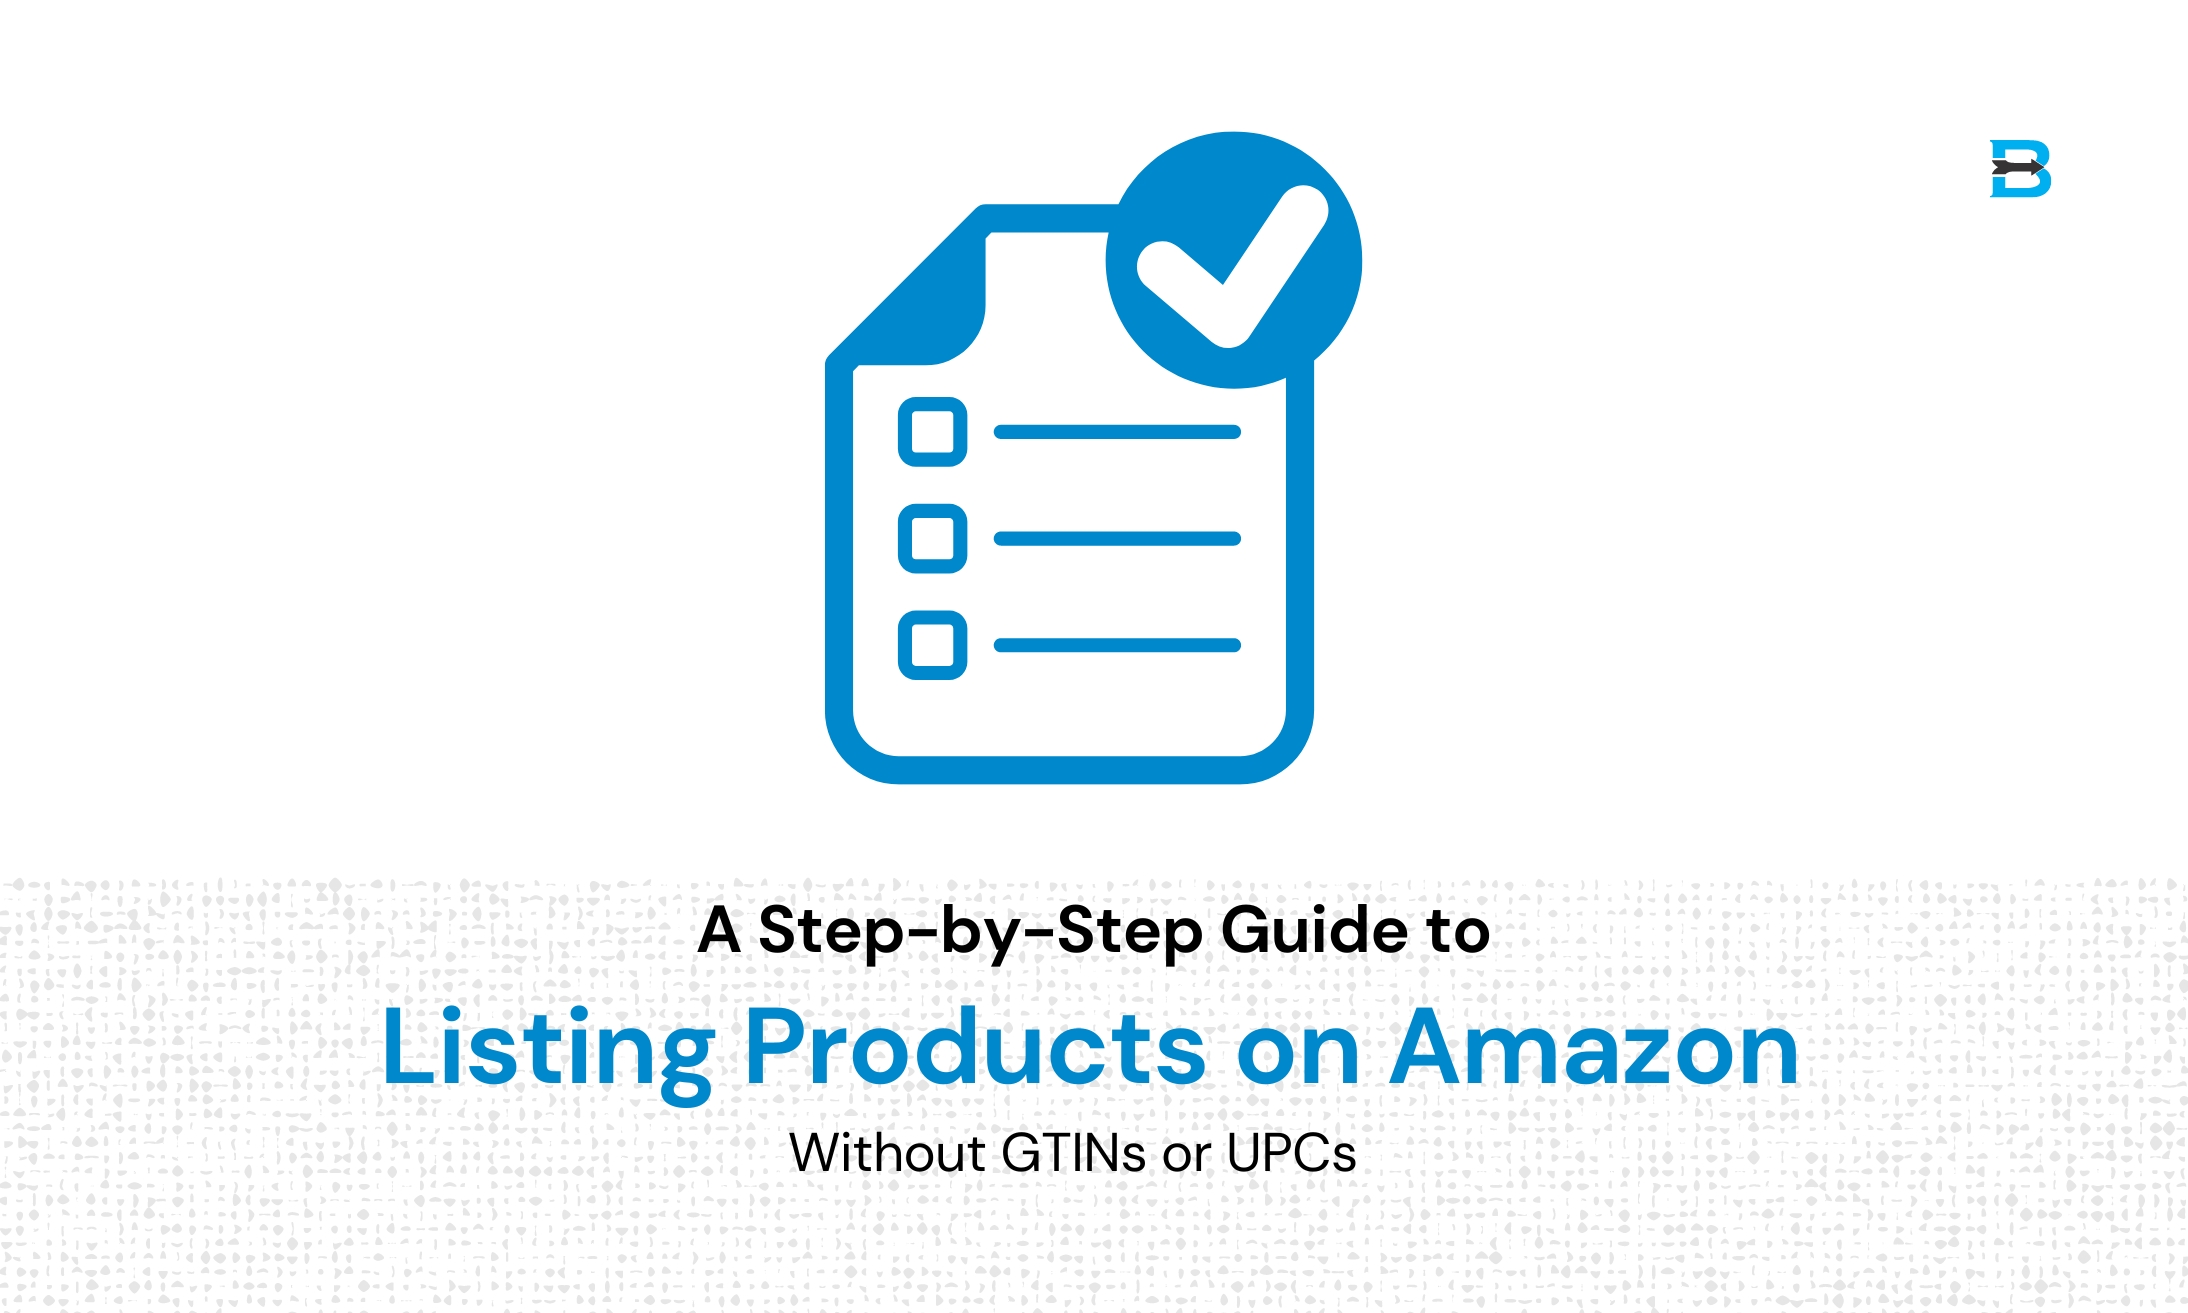 A Step-by-Step Guide to Listing Products on Amazon Without GTINs or UPCs